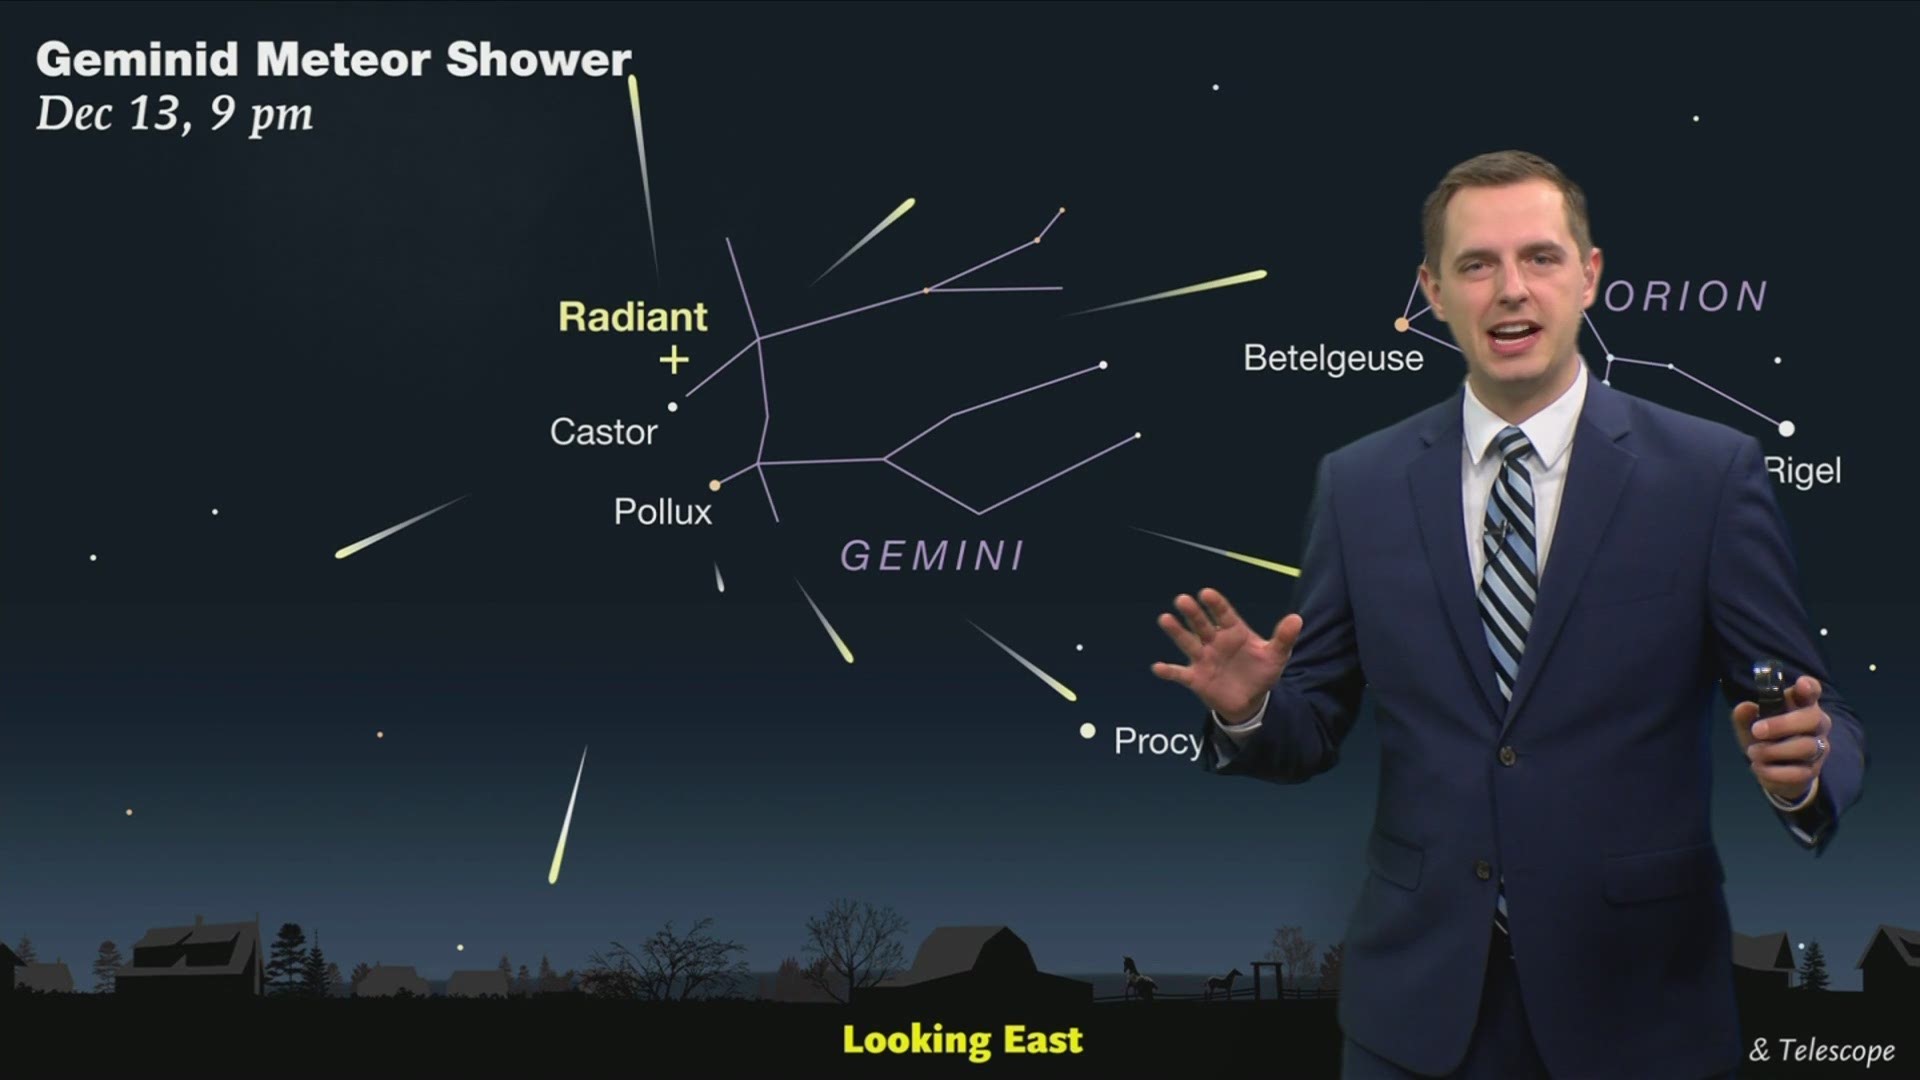 The best night to view the meteor shower will be Dec. 13.